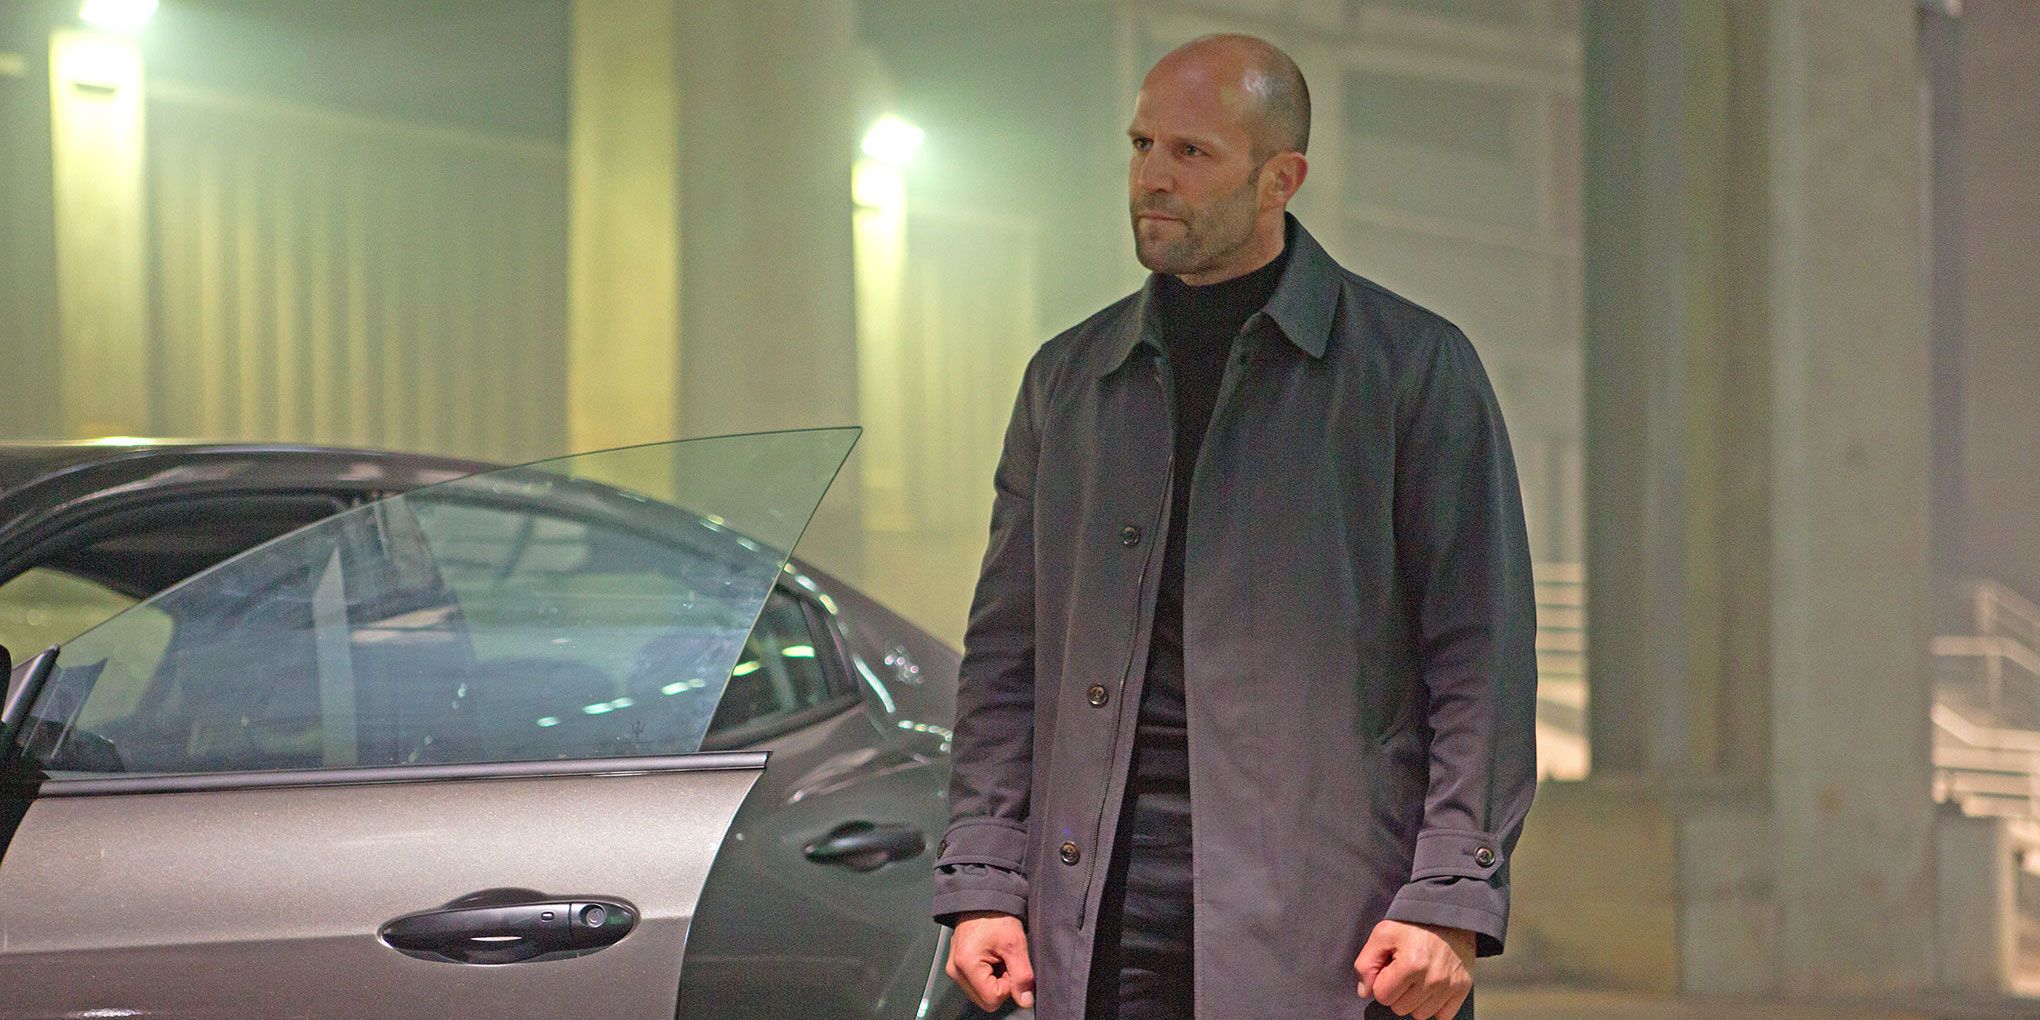 Deckard Shaw steps out of his car